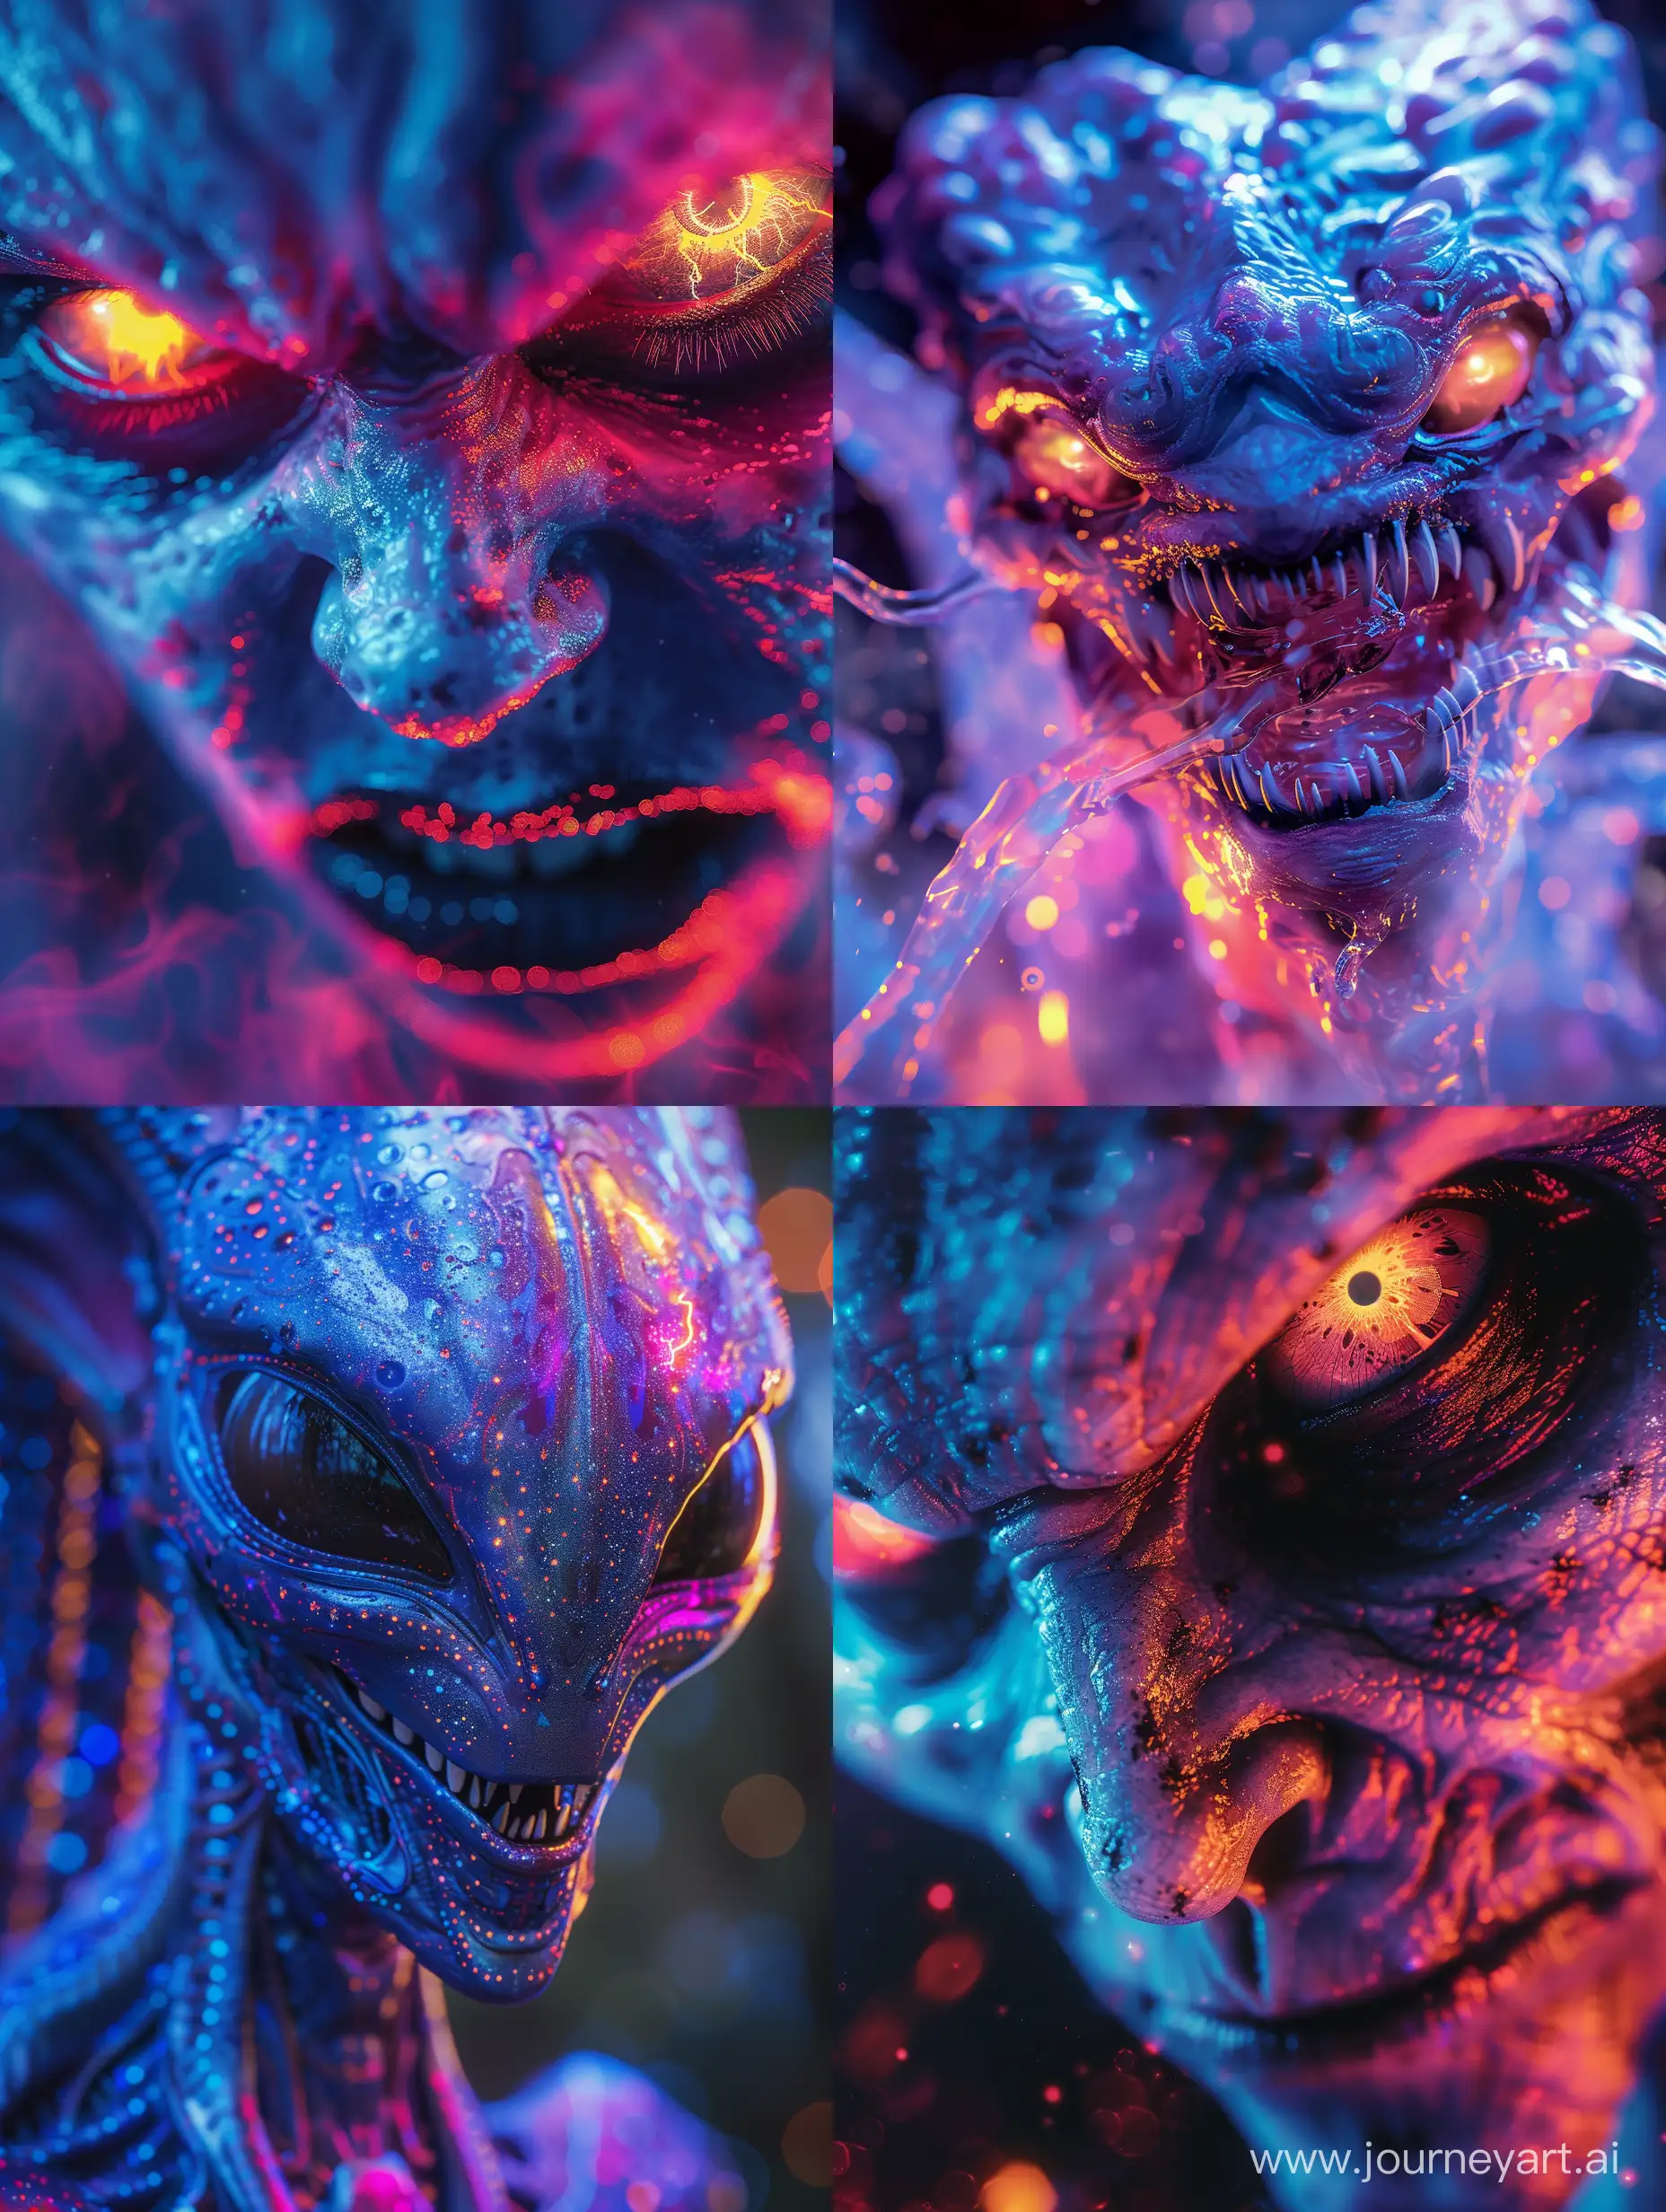 Colorful-Angry-Alien-Fashion-Shoot-with-Dramatic-Lighting